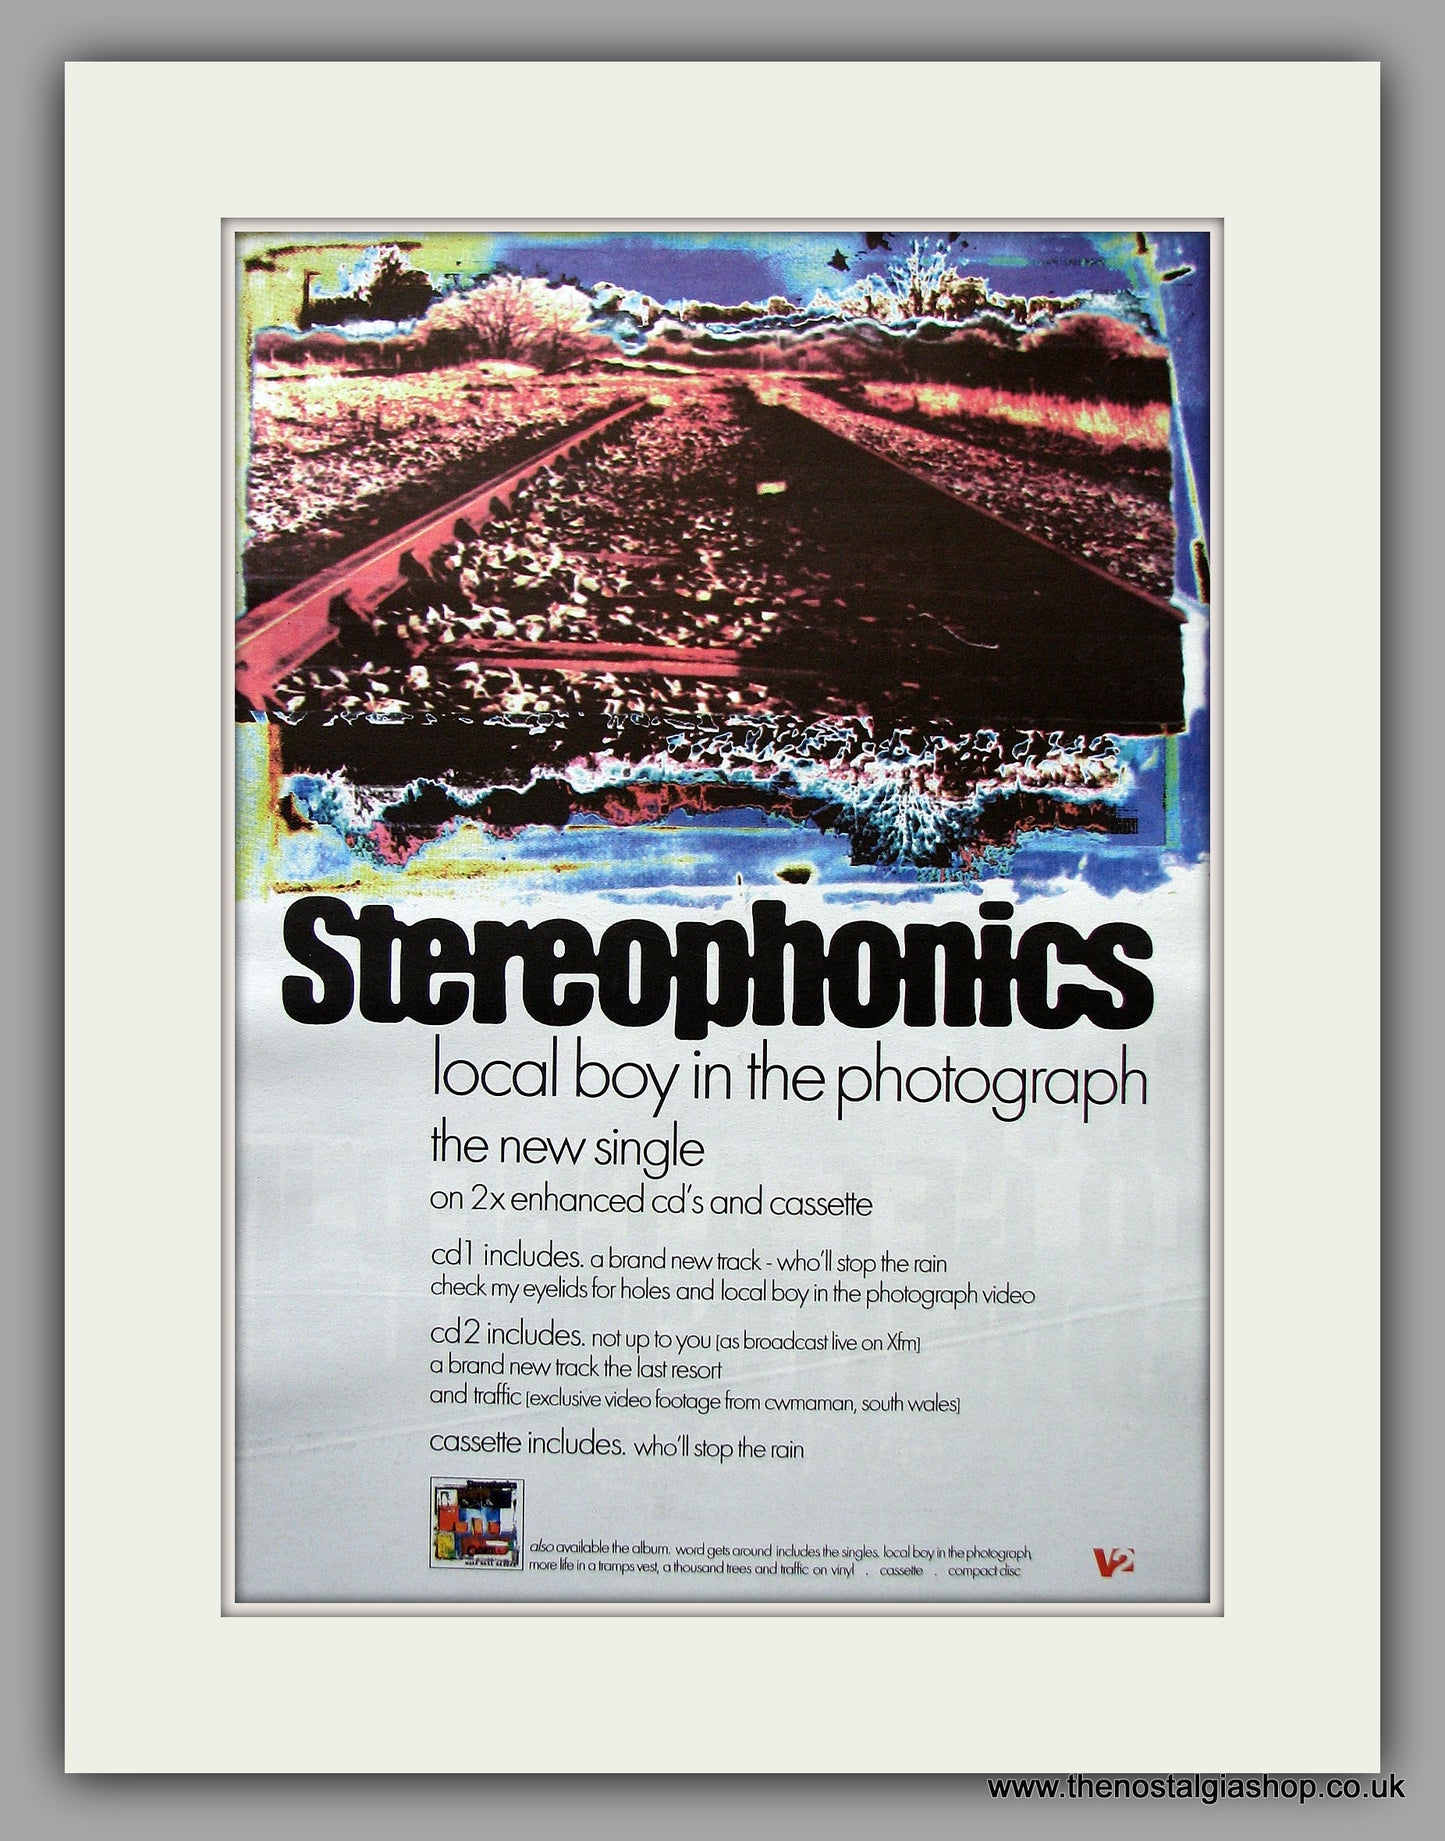 Stereophonics - Local Boy In The Photograph. Original Vintage Advert 1998 (ref AD11092)